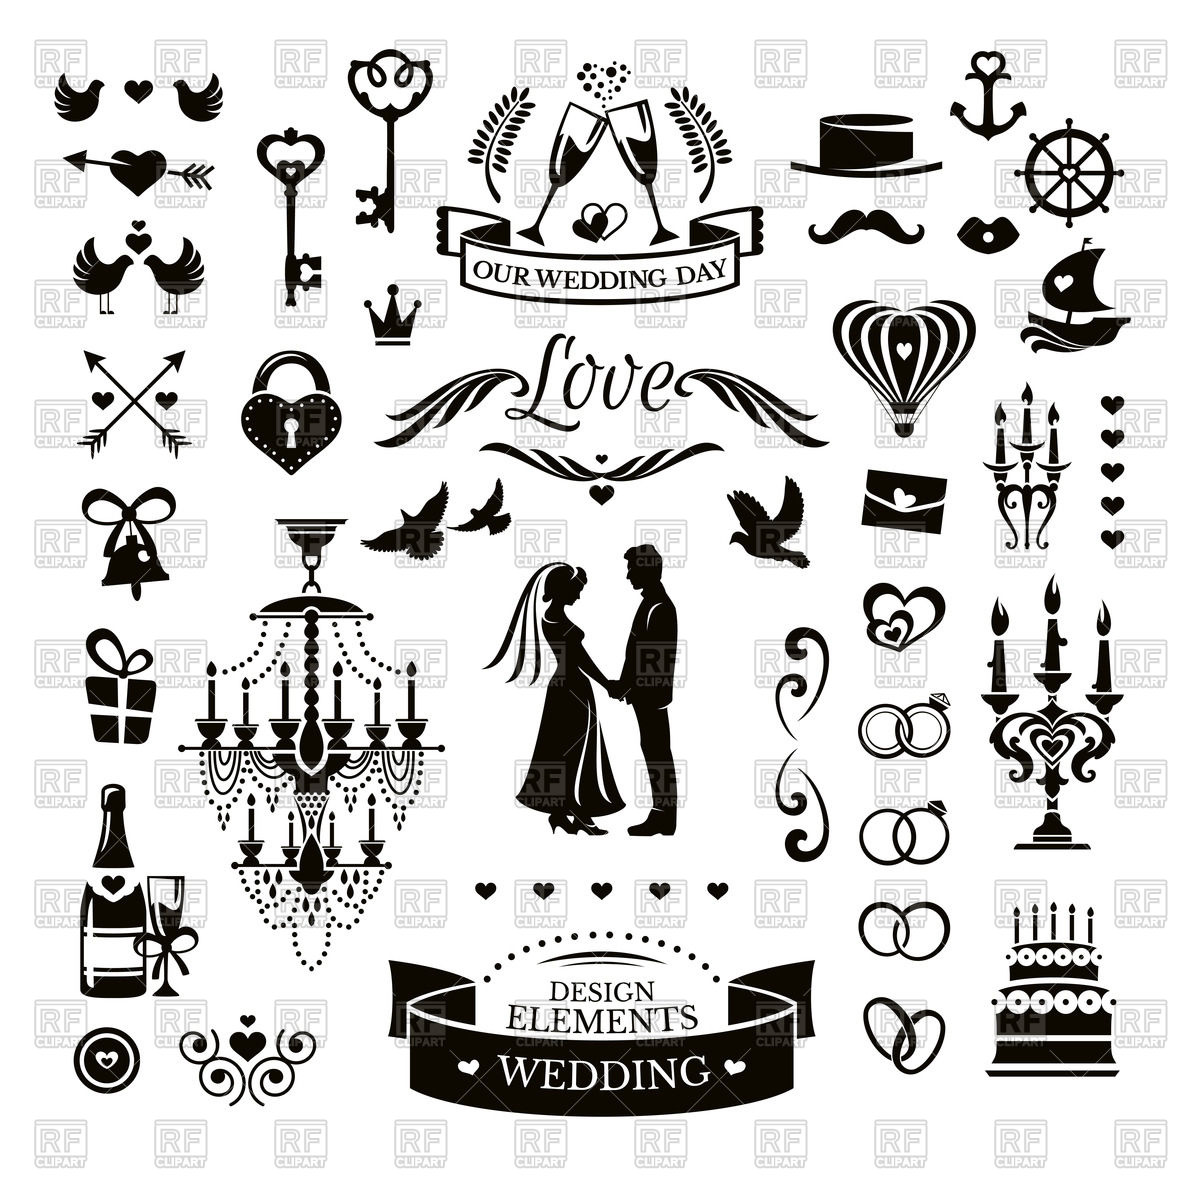 Download Wedding Icon Vector 271773 Free Icons Library